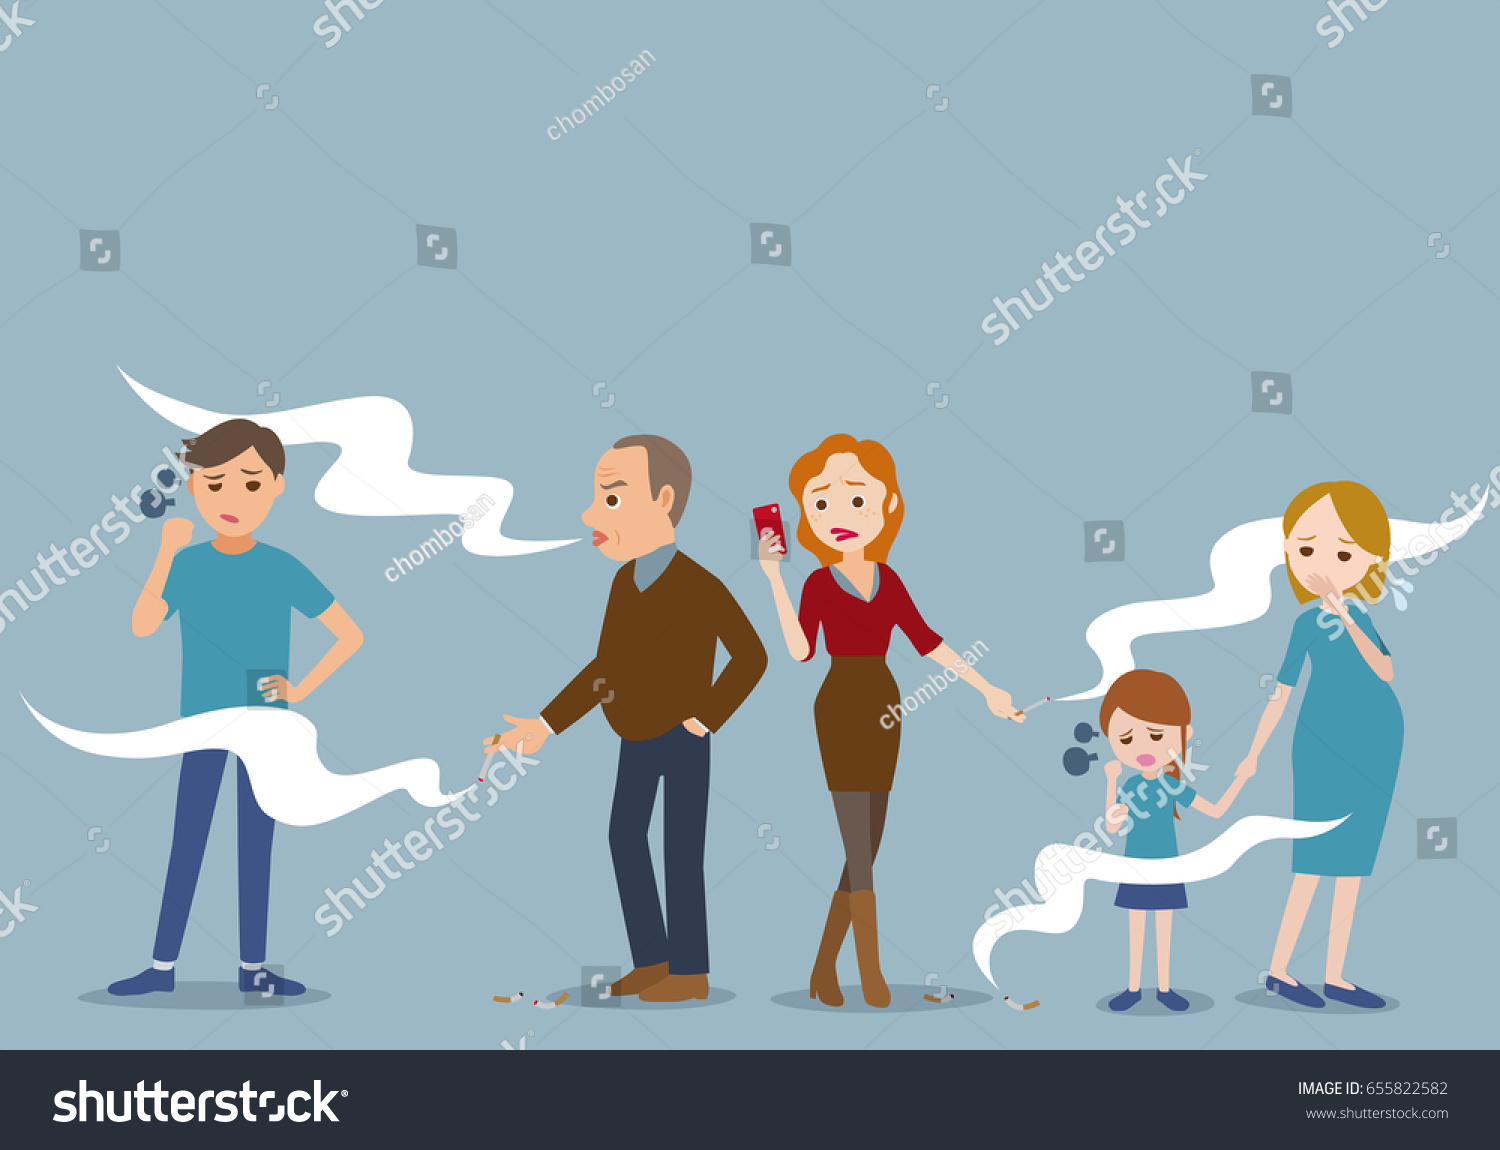 Passive Smoking Concept Illustration Stock Vector Royalty Free 655822582